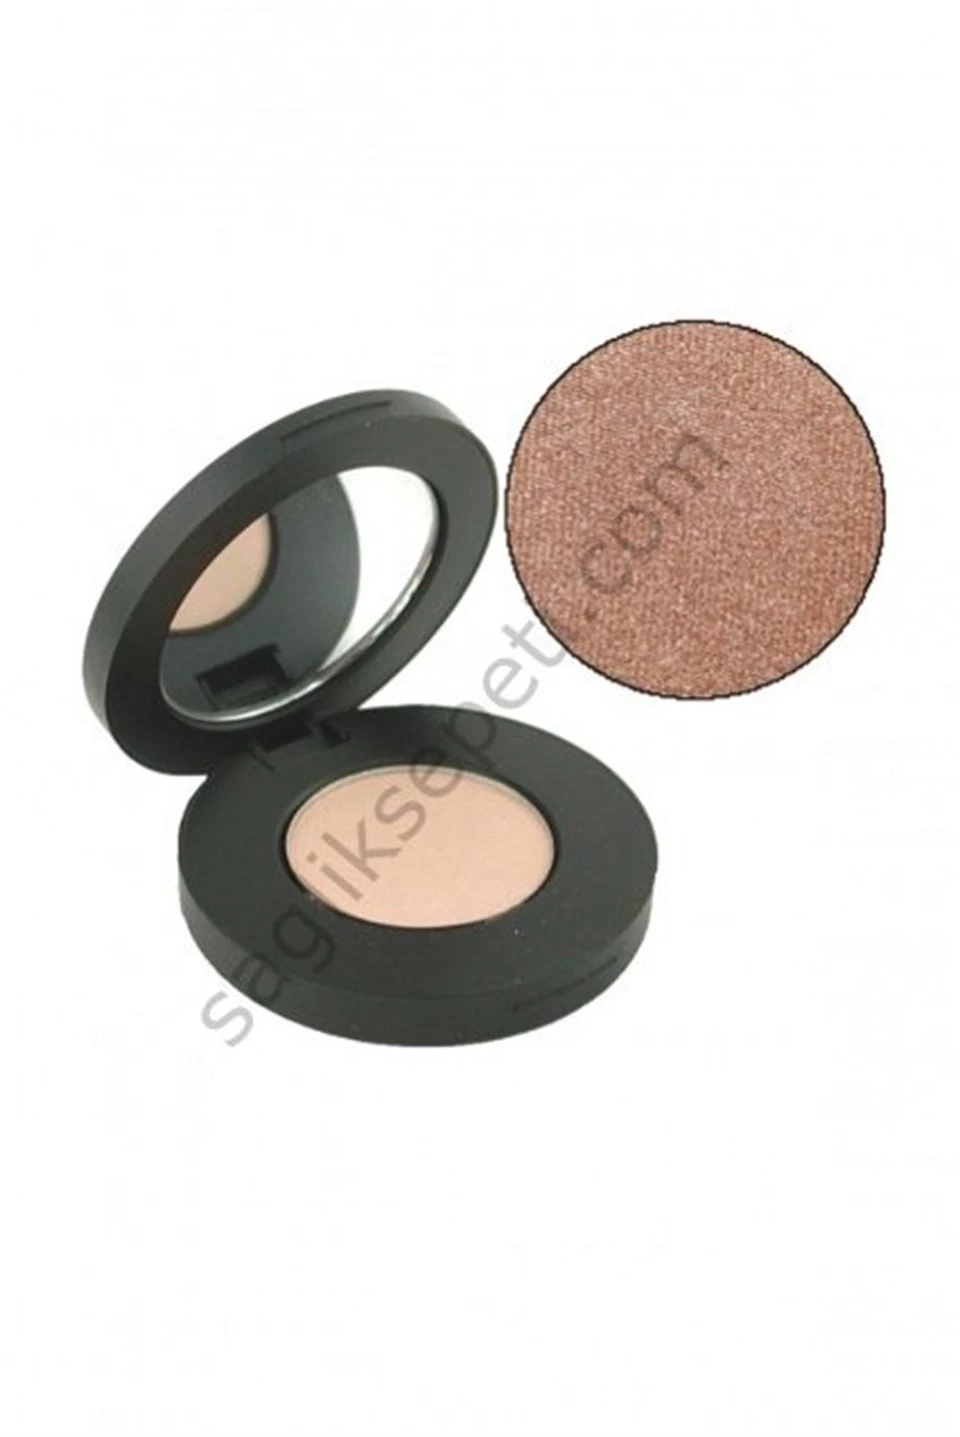 YOUNG BLOOD PRESSED EYESHADOW GILDED